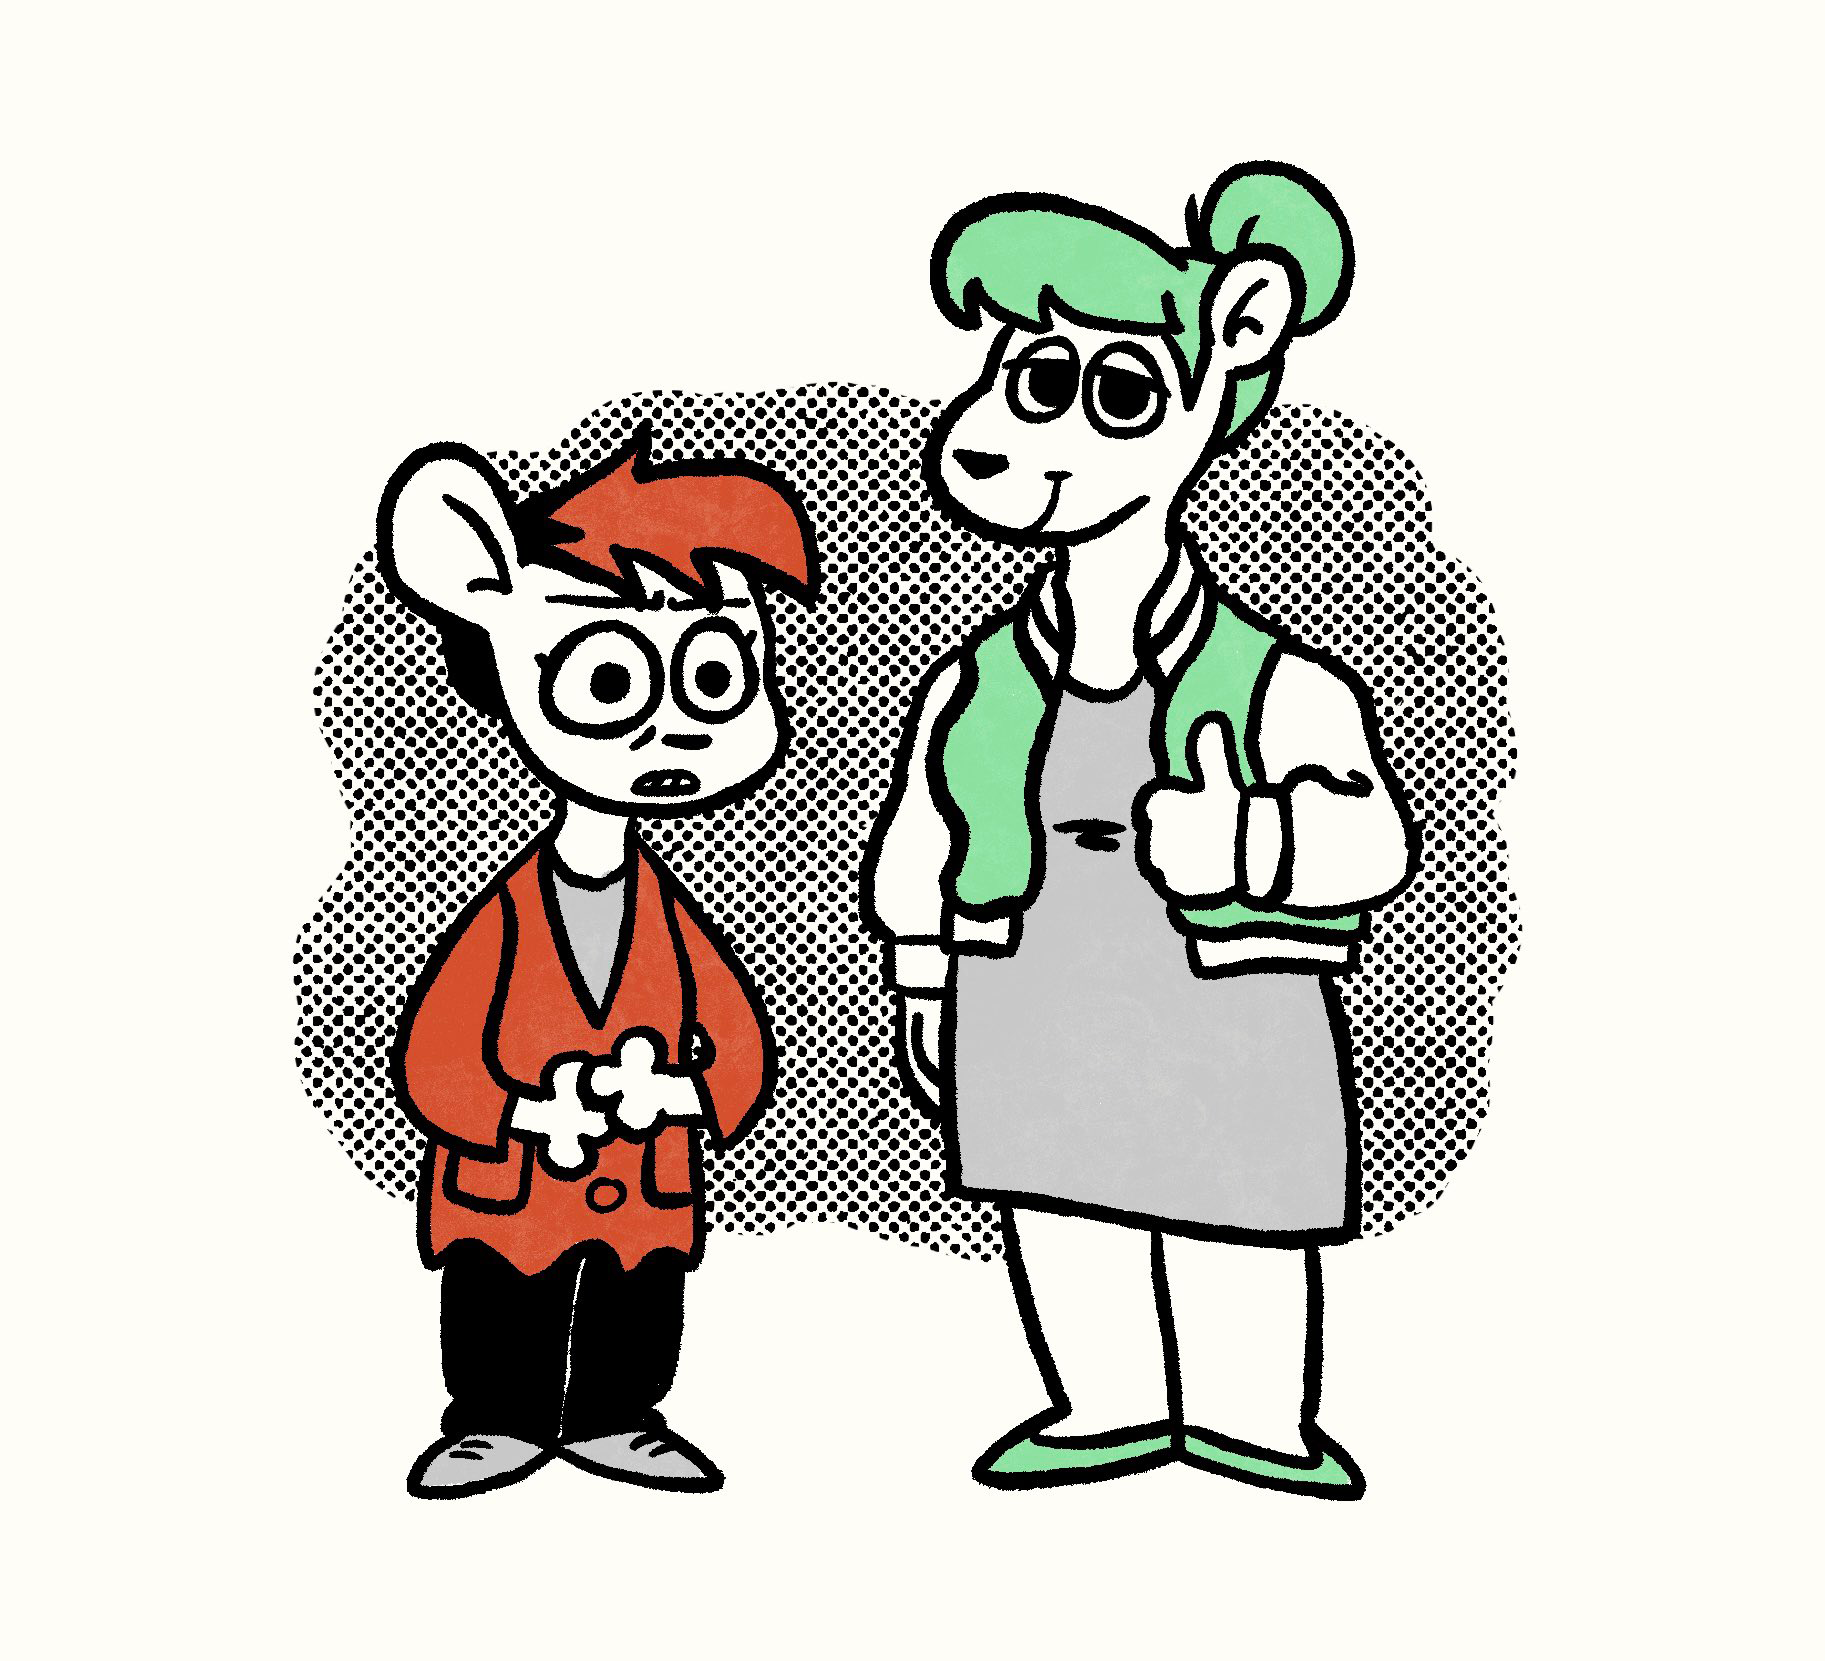 A drawing of two furry women standing in front of a blob of dots. On the left is a shorter mouse woman in a long cardigan with a nervous expression and red hair/clothing. On the right is a taller bear woman with green and hair/clothing giving a thumbs up.